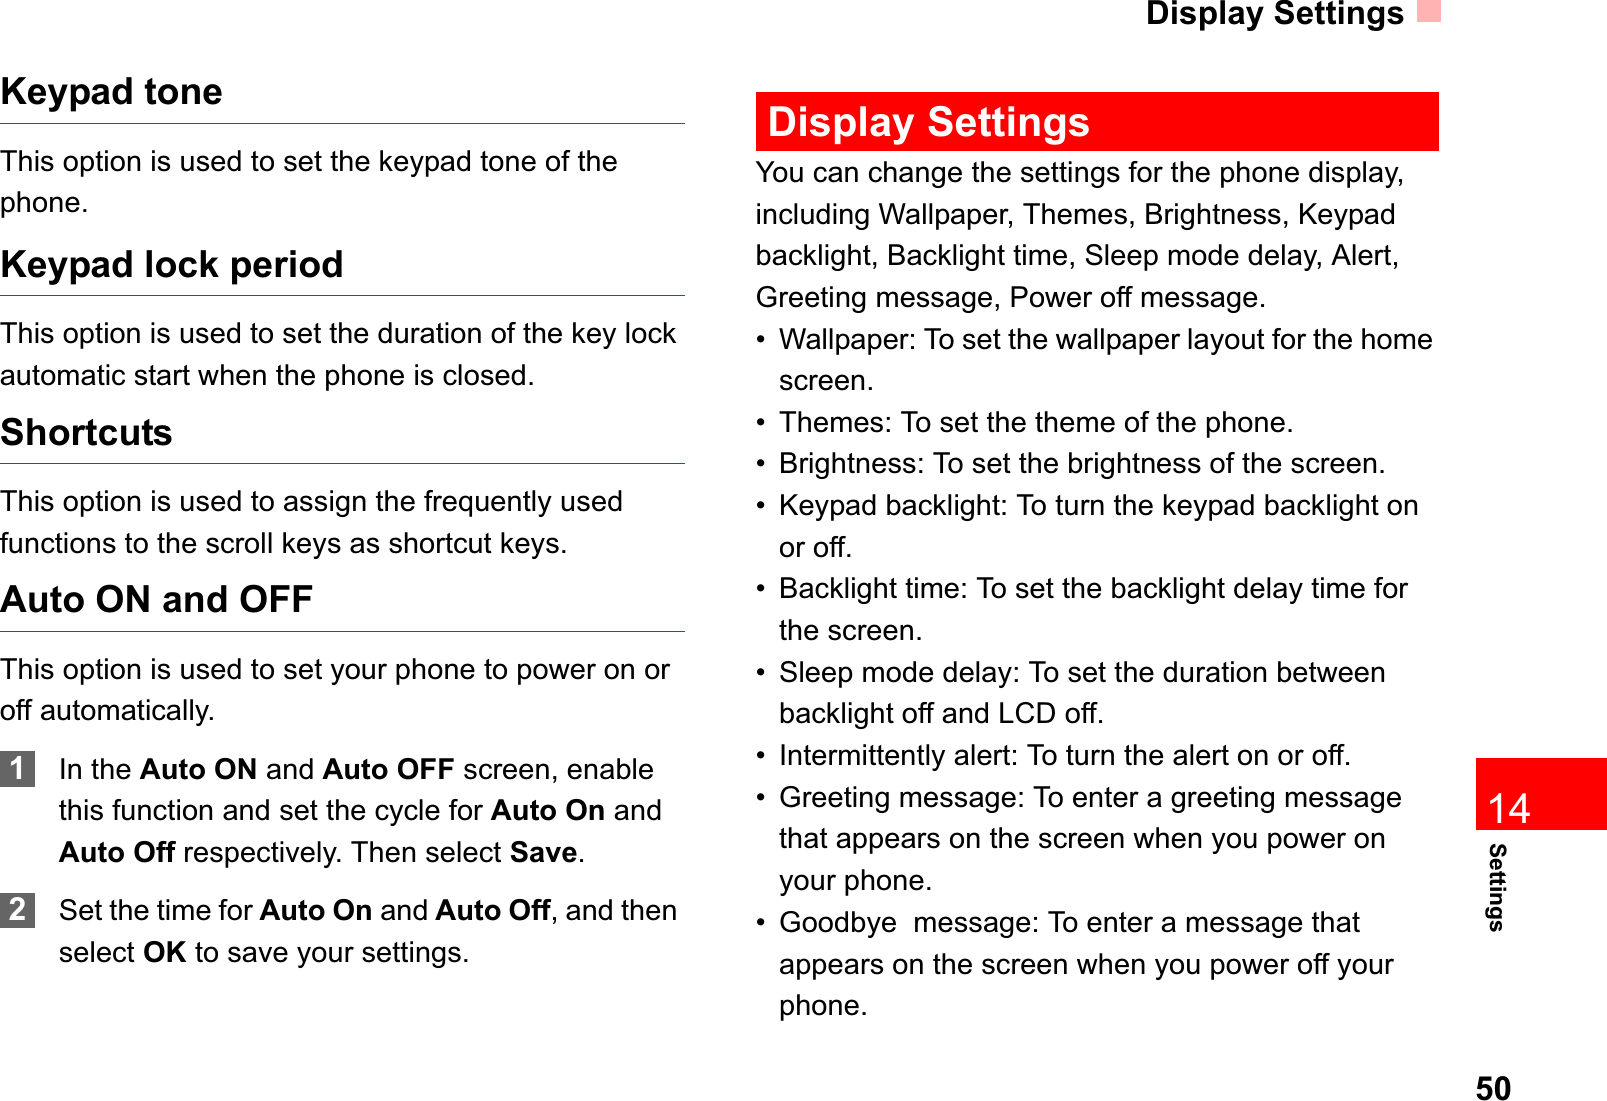 Display Settings50Settings14Keypad toneThis option is used to set the keypad tone of the phone.Keypad lock periodThis option is used to set the duration of the key lock automatic start when the phone is closed. ShortcutsThis option is used to assign the frequently used functions to the scroll keys as shortcut keys.Auto ON and OFFThis option is used to set your phone to power on or off automatically.1In the Auto ON and Auto OFF screen, enable this function and set the cycle for Auto On and Auto Off respectively. Then select Save.2Set the time for Auto On and Auto Off, and then select OK to save your settings.Display SettingsYou can change the settings for the phone display, including Wallpaper, Themes, Brightness, Keypad backlight, Backlight time, Sleep mode delay, Alert,  Greeting message, Power off message.• Wallpaper: To set the wallpaper layout for the home screen.• Themes: To set the theme of the phone.• Brightness: To set the brightness of the screen.• Keypad backlight: To turn the keypad backlight on or off.• Backlight time: To set the backlight delay time for the screen.• Sleep mode delay: To set the duration between backlight off and LCD off.• Intermittently alert: To turn the alert on or off.• Greeting message: To enter a greeting message that appears on the screen when you power on your phone.• Goodbye  message: To enter a message that appears on the screen when you power off your phone.